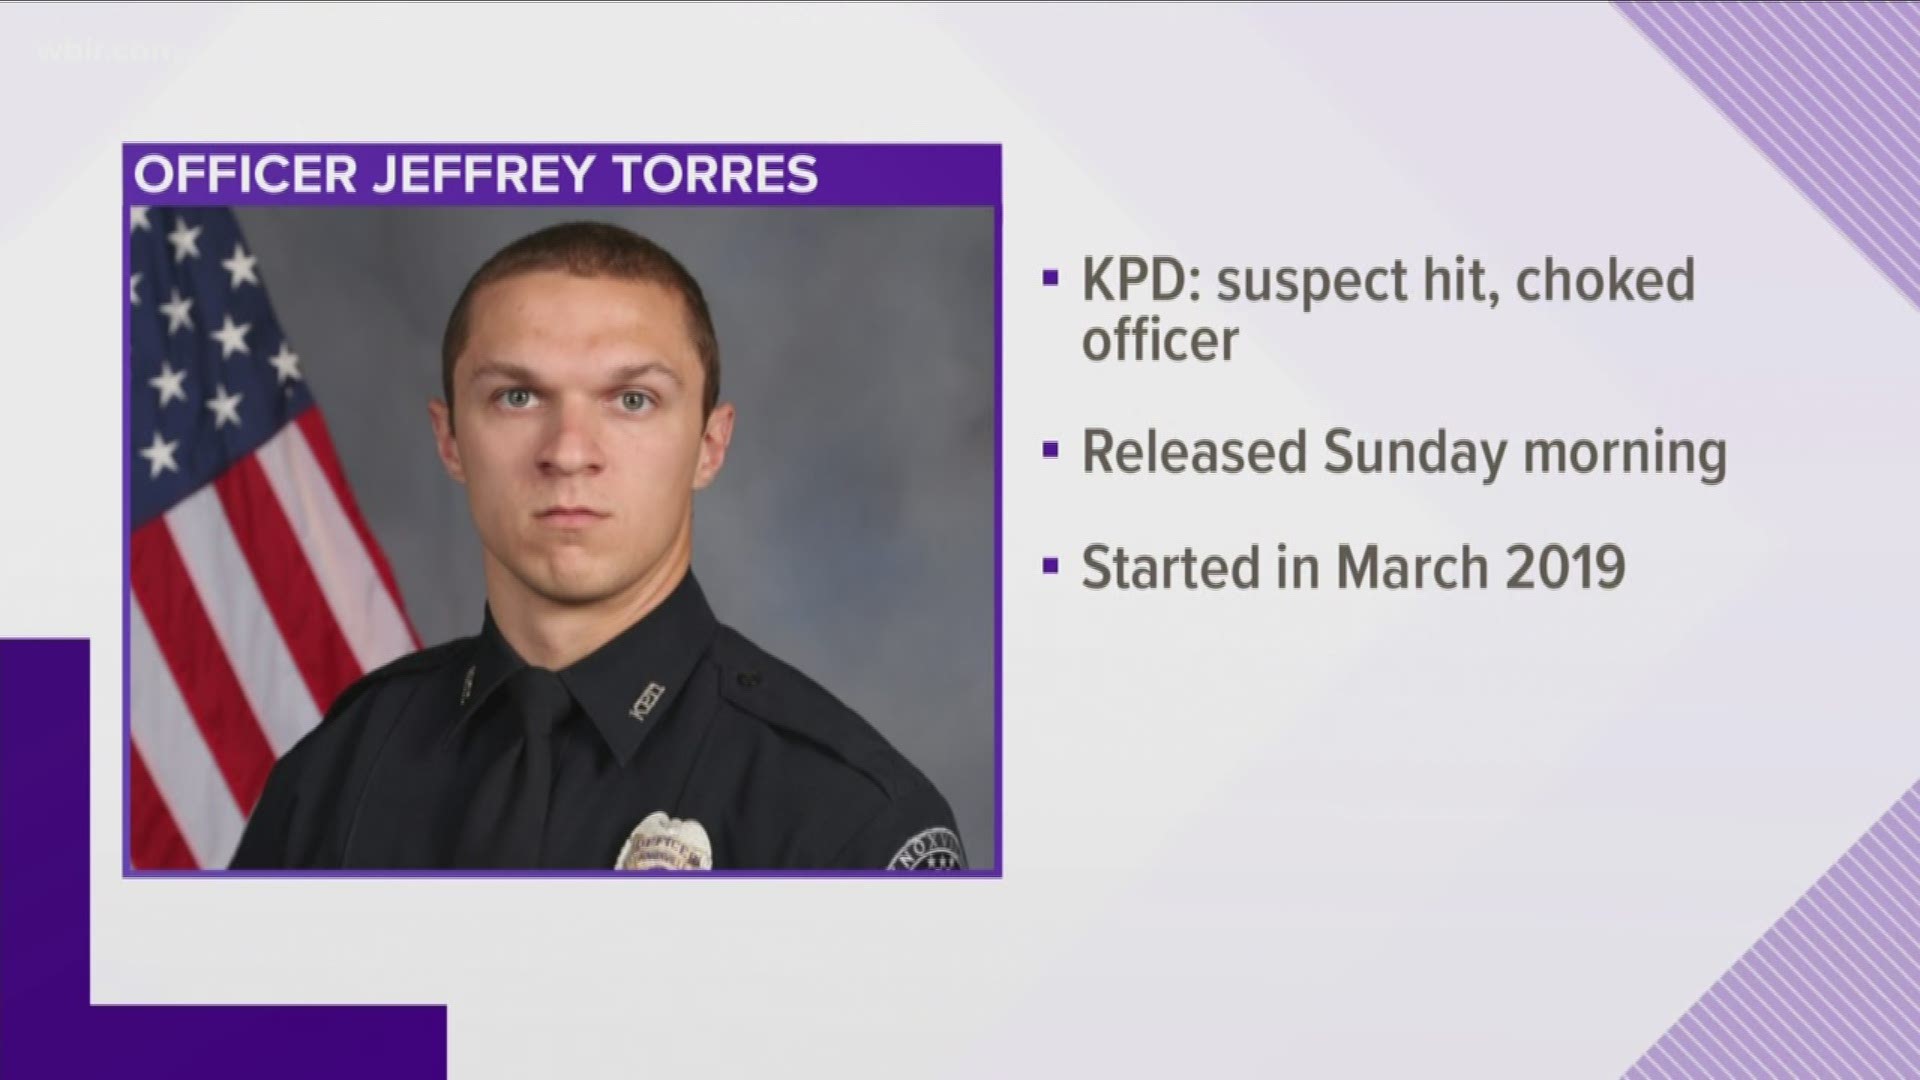 Police say 25-year-old Donald Laymance attacked KPD officer Jeffrey Torres.